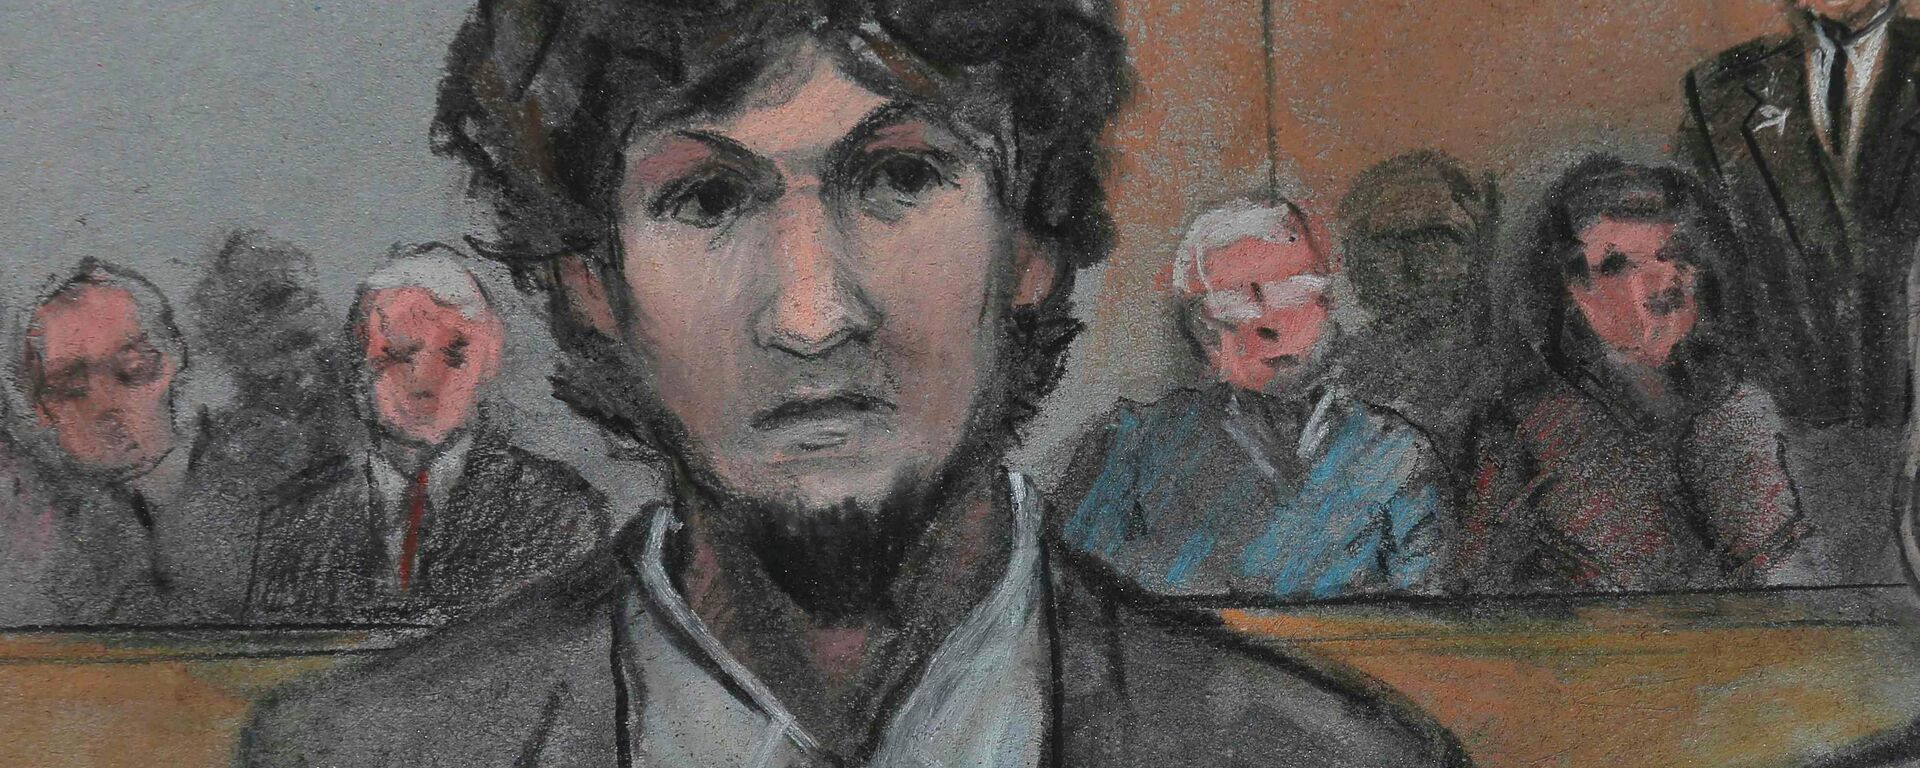 Boston Marathon bomber Dzhokhar Tsarnaev is shown in a courtroom sketch after he is sentenced at the federal courthouse in Boston, Massachusetts May 15, 2015 - Sputnik International, 1920, 26.08.2022